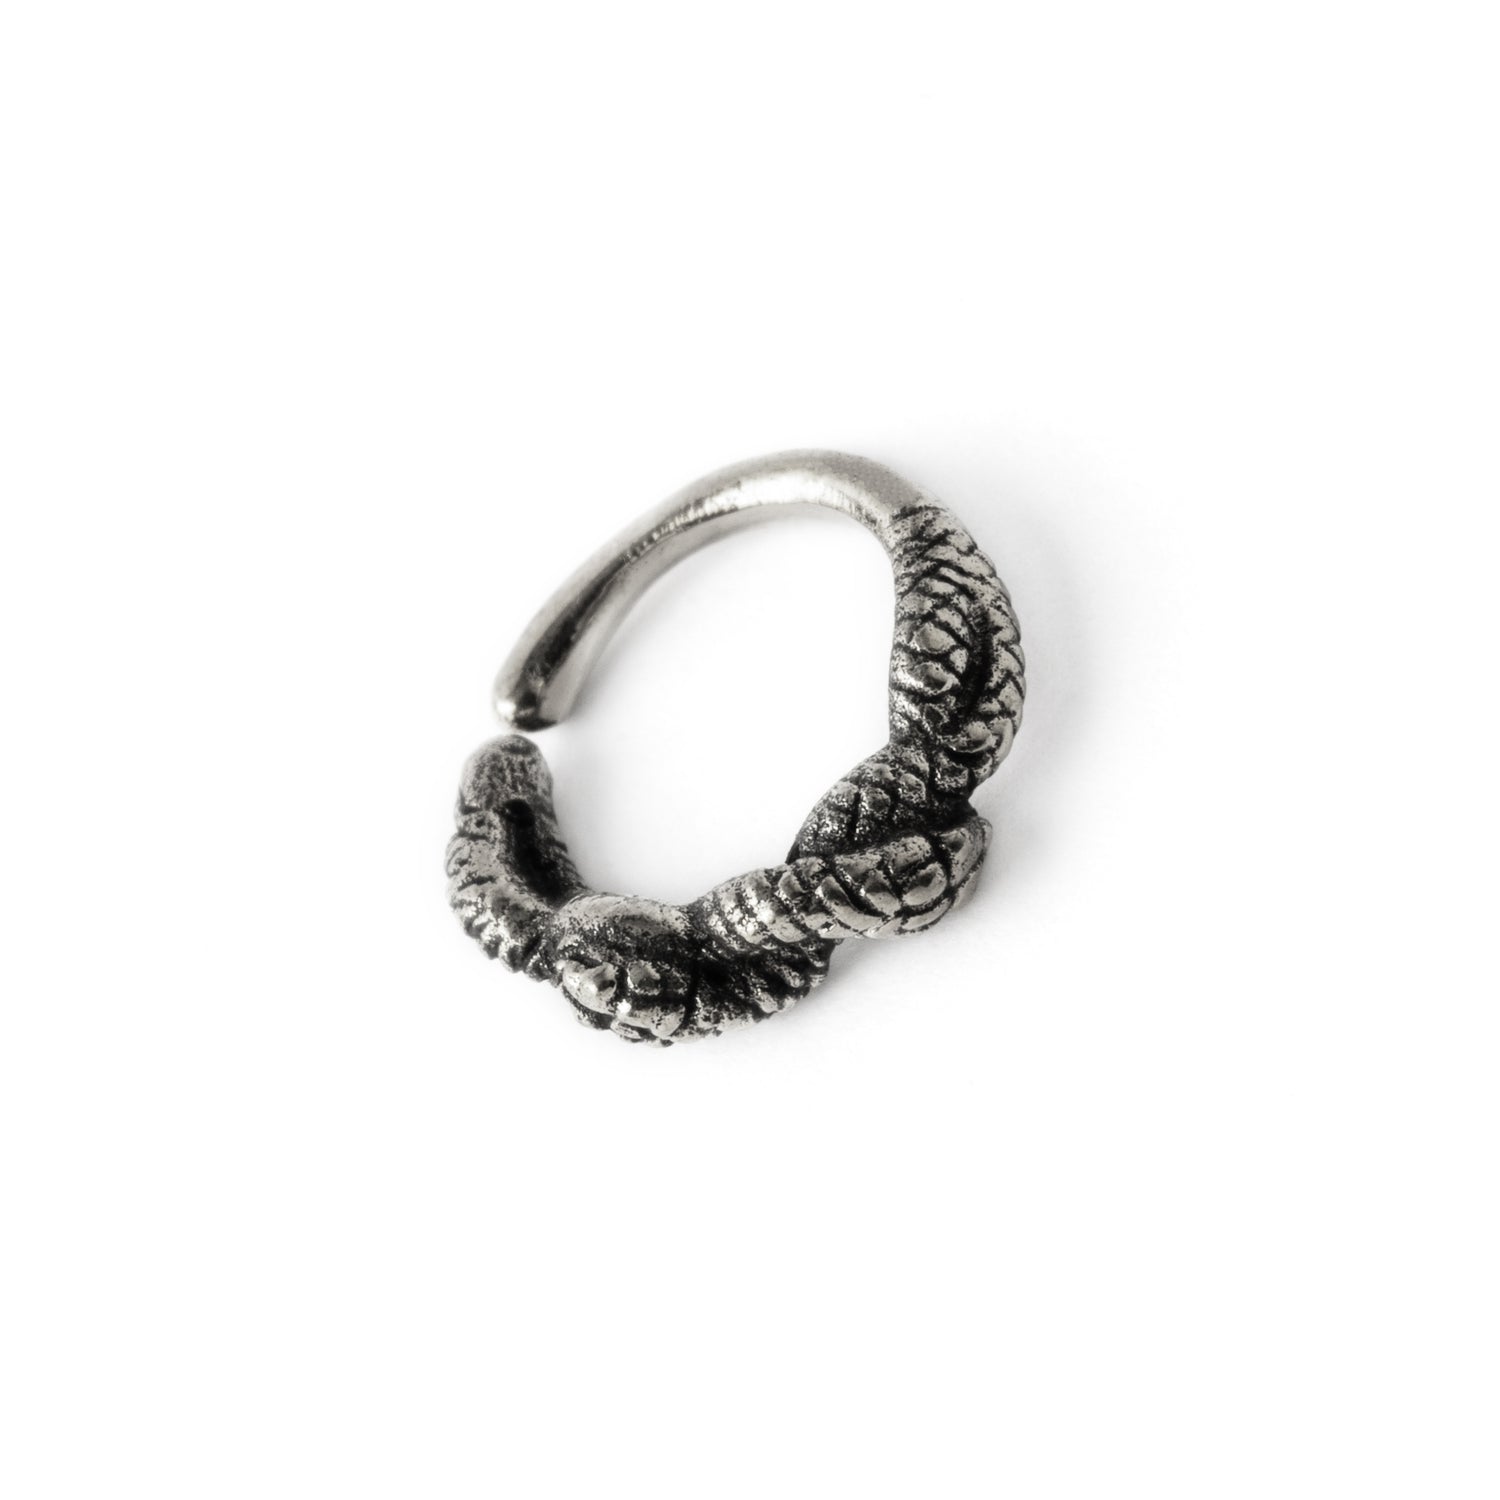 Kobara Silver Septum Ring right side view